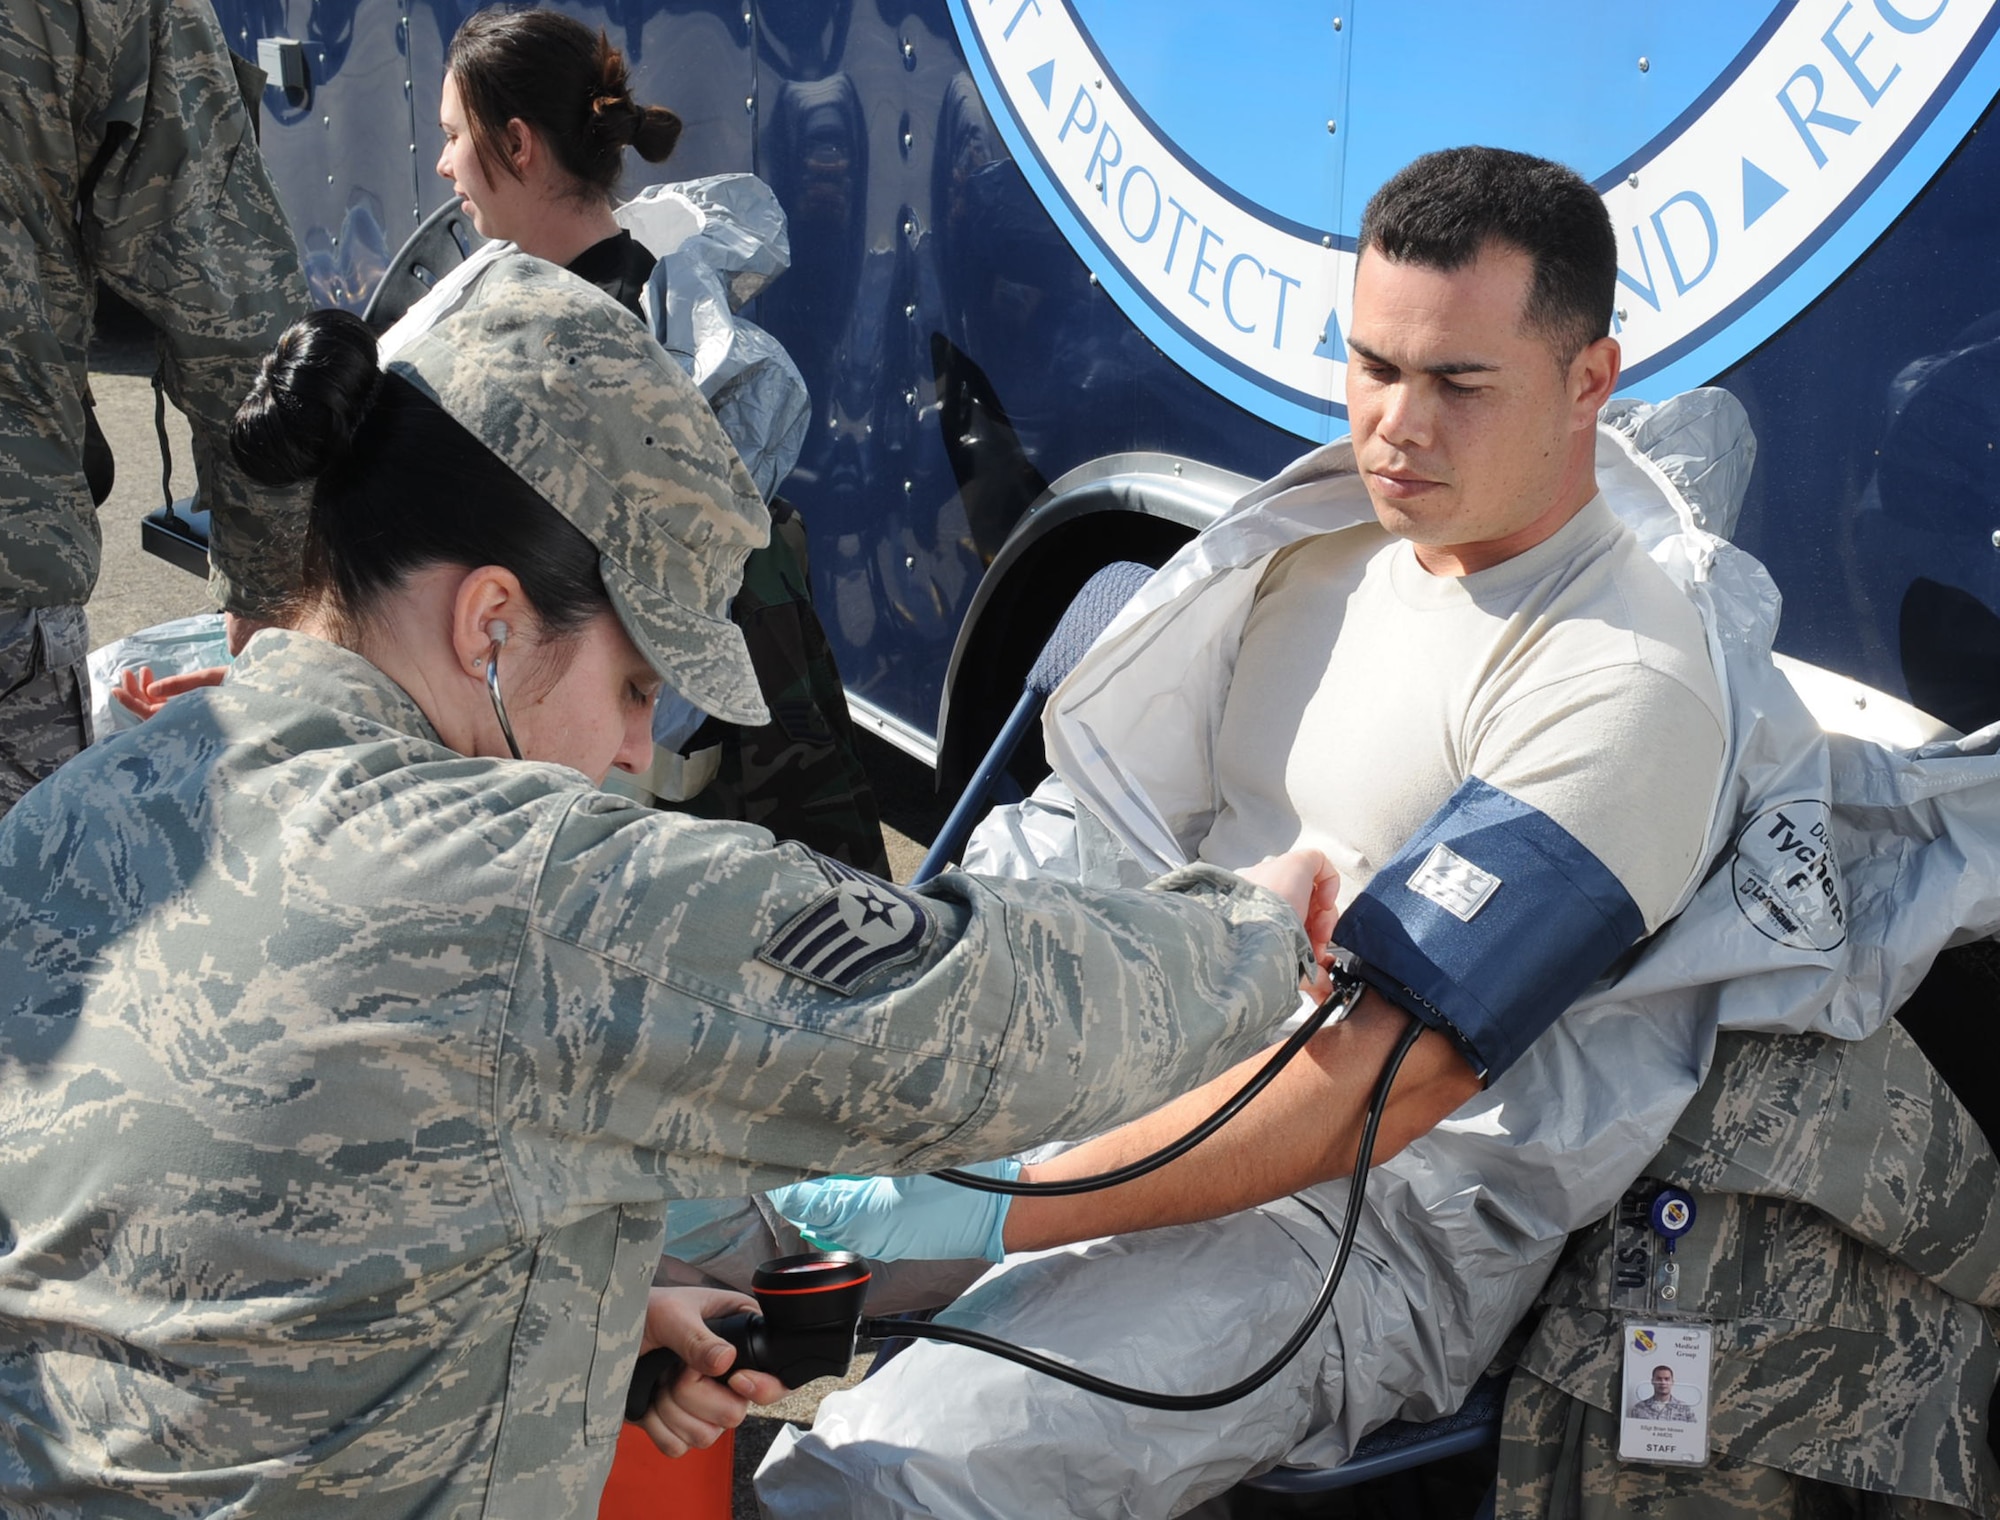 Staff Sgt. Candy Taylor, 4th Medical Group aerospace medicine technician, checks the blood pressure of Senior Airman Brain Moses, 4th Medical Group bioenvironmental engineering technician, before the Chemical Biological Radiological Nuclear Explosive challenge kicks-off on Seymour Johnson Air Force Base, N.C., March 23, 2010. Taylor checked Moses' blood pressure, respiration, heart rate and visual acvity to ensure he was medically clear to participate. Moses hails from Fayetteville, N.C., and Taylor is from Newport News, Va. (U.S. Air Force photo/Senior Airman Whitney Lambert)